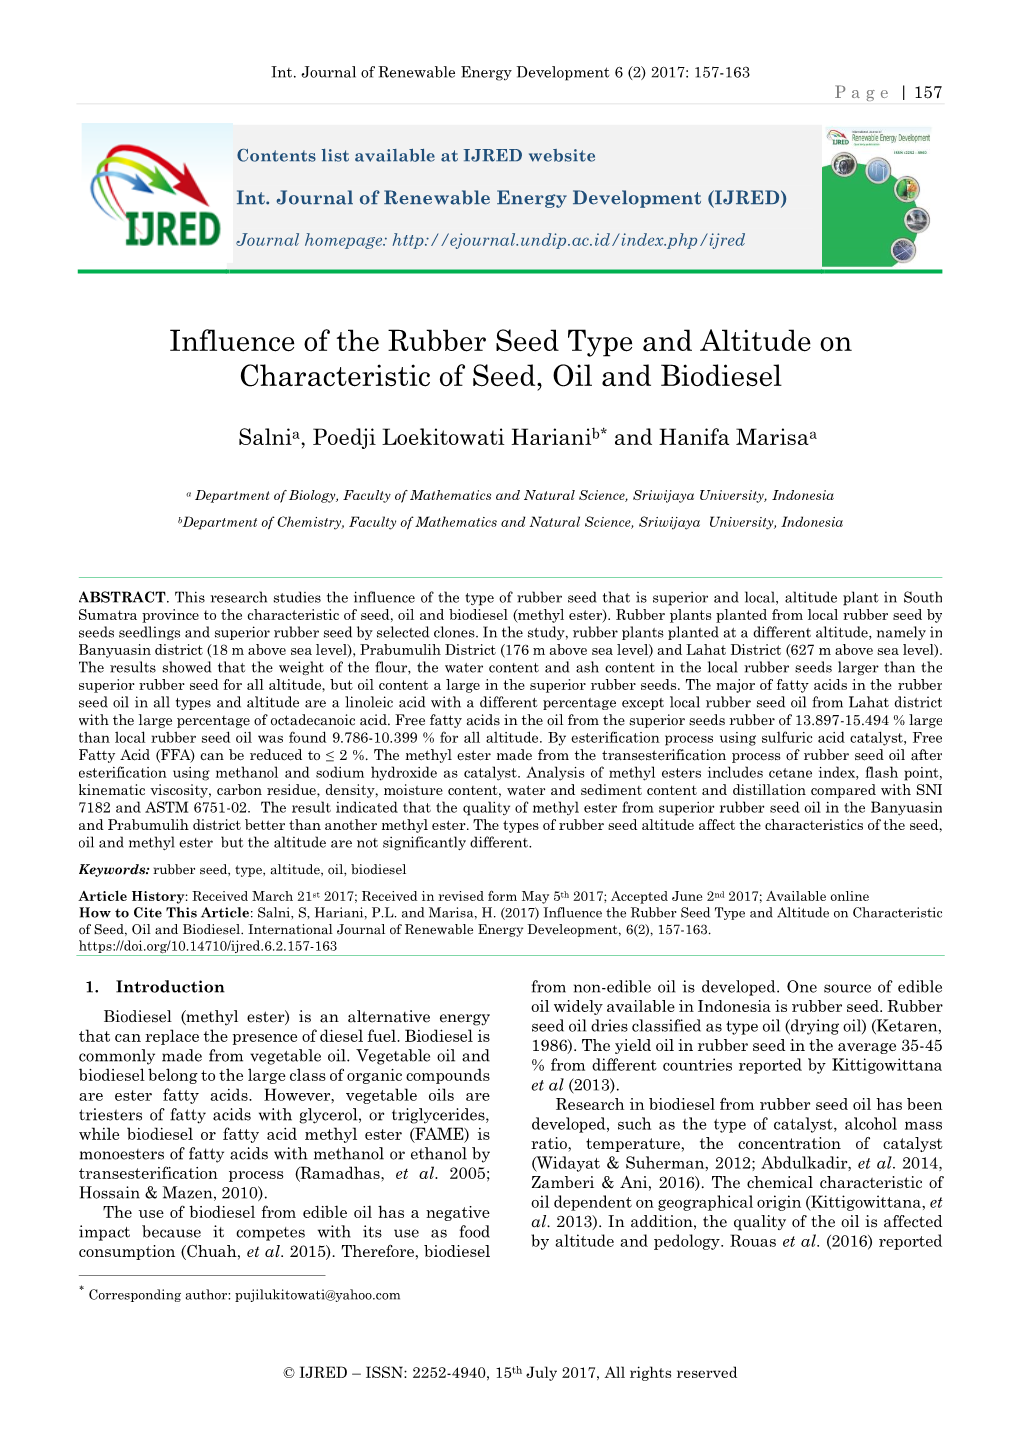 Influence the Rubber Seed Type and Altitude on Characteristic of Seed, Oil and Biodiesel